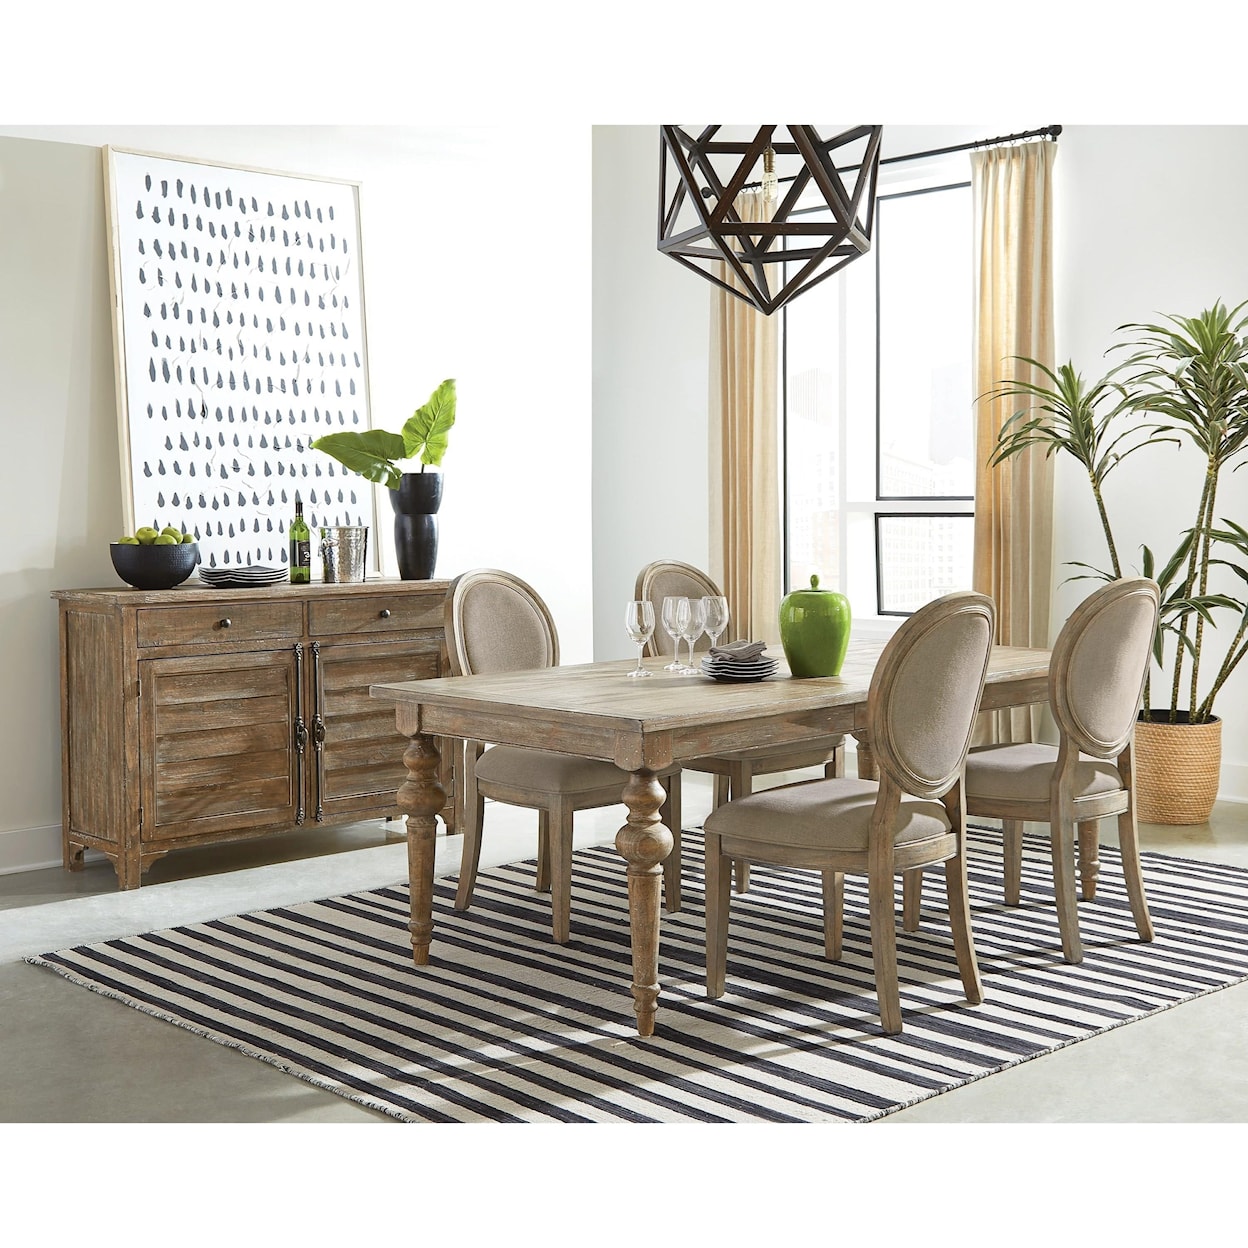 Riverside Furniture Mix and Match Sideboard